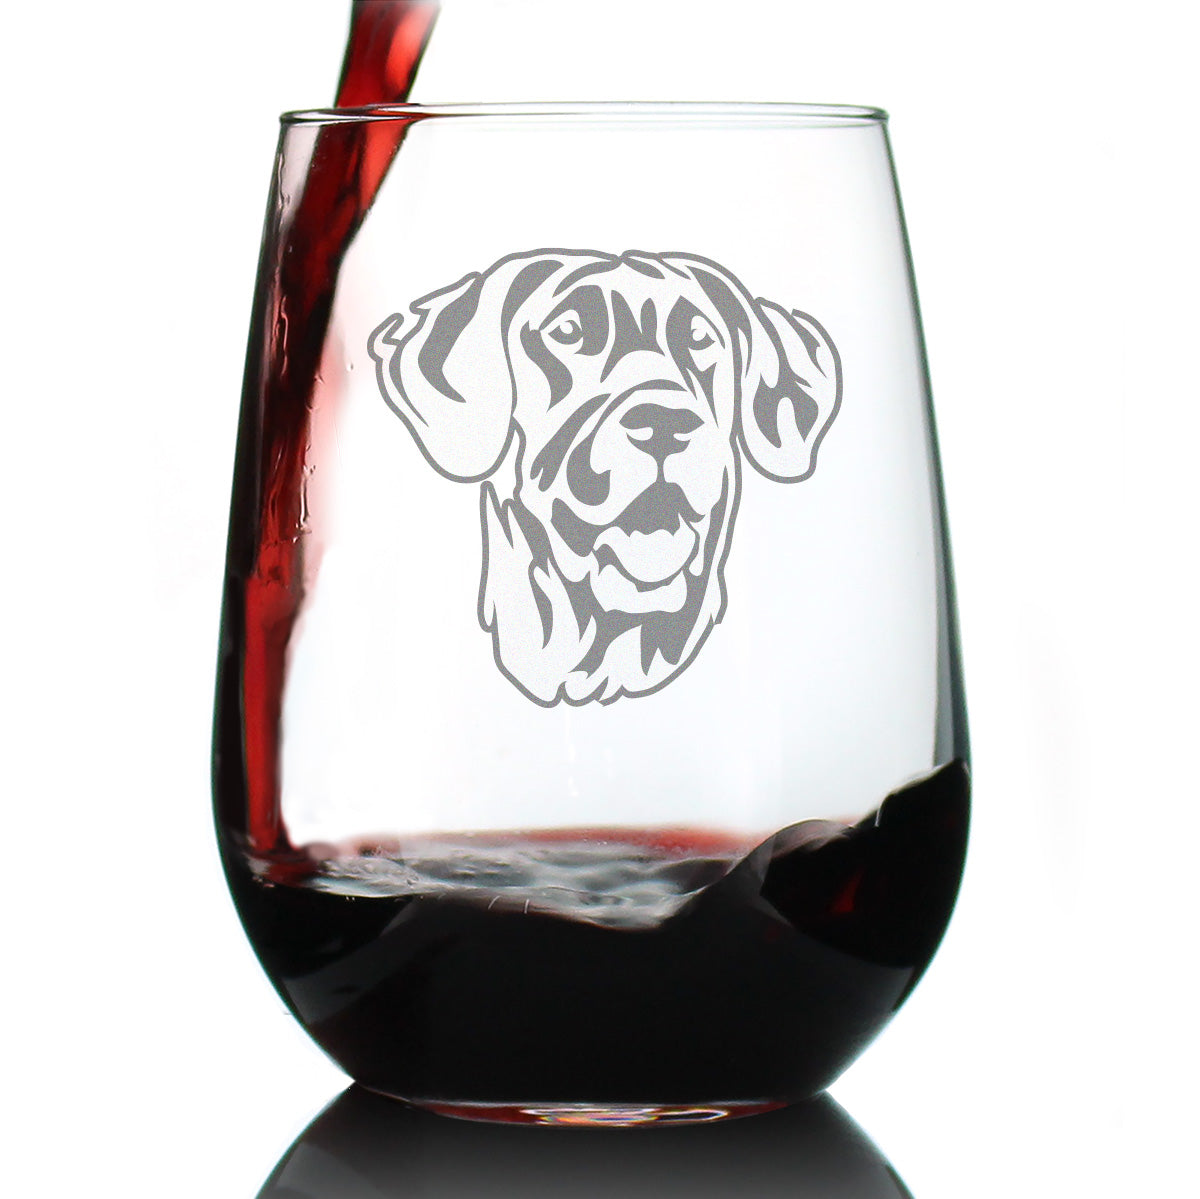 Great Dane Face Stemless Wine Glass - Cute Gifts for Dog Lovers with Great Danes - Large Glasses